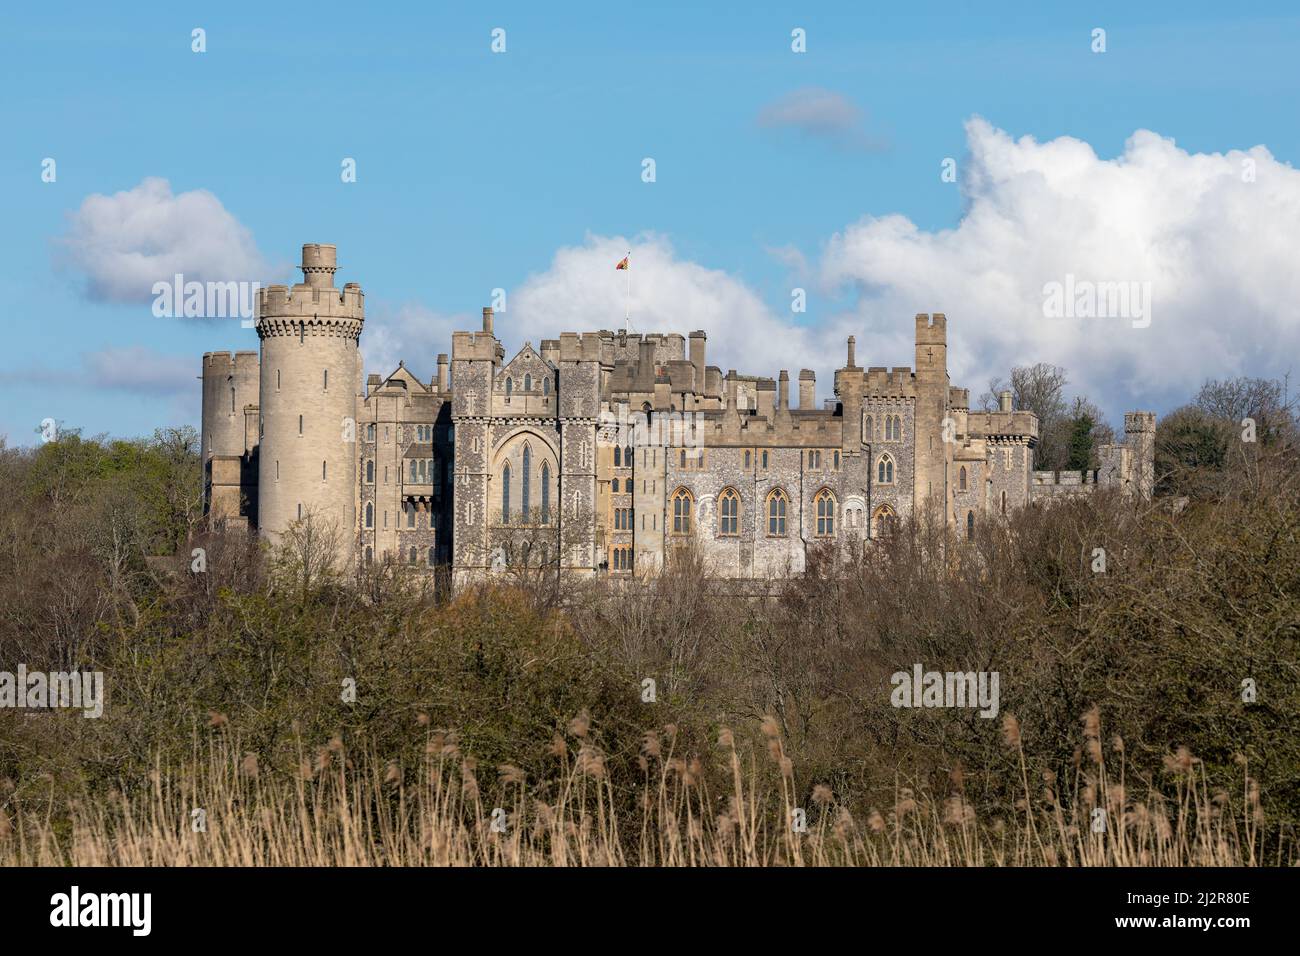 View of the West Sussex market town of Arundel. South side of the castle illuminated by the Spring sunshine. Stock Photo